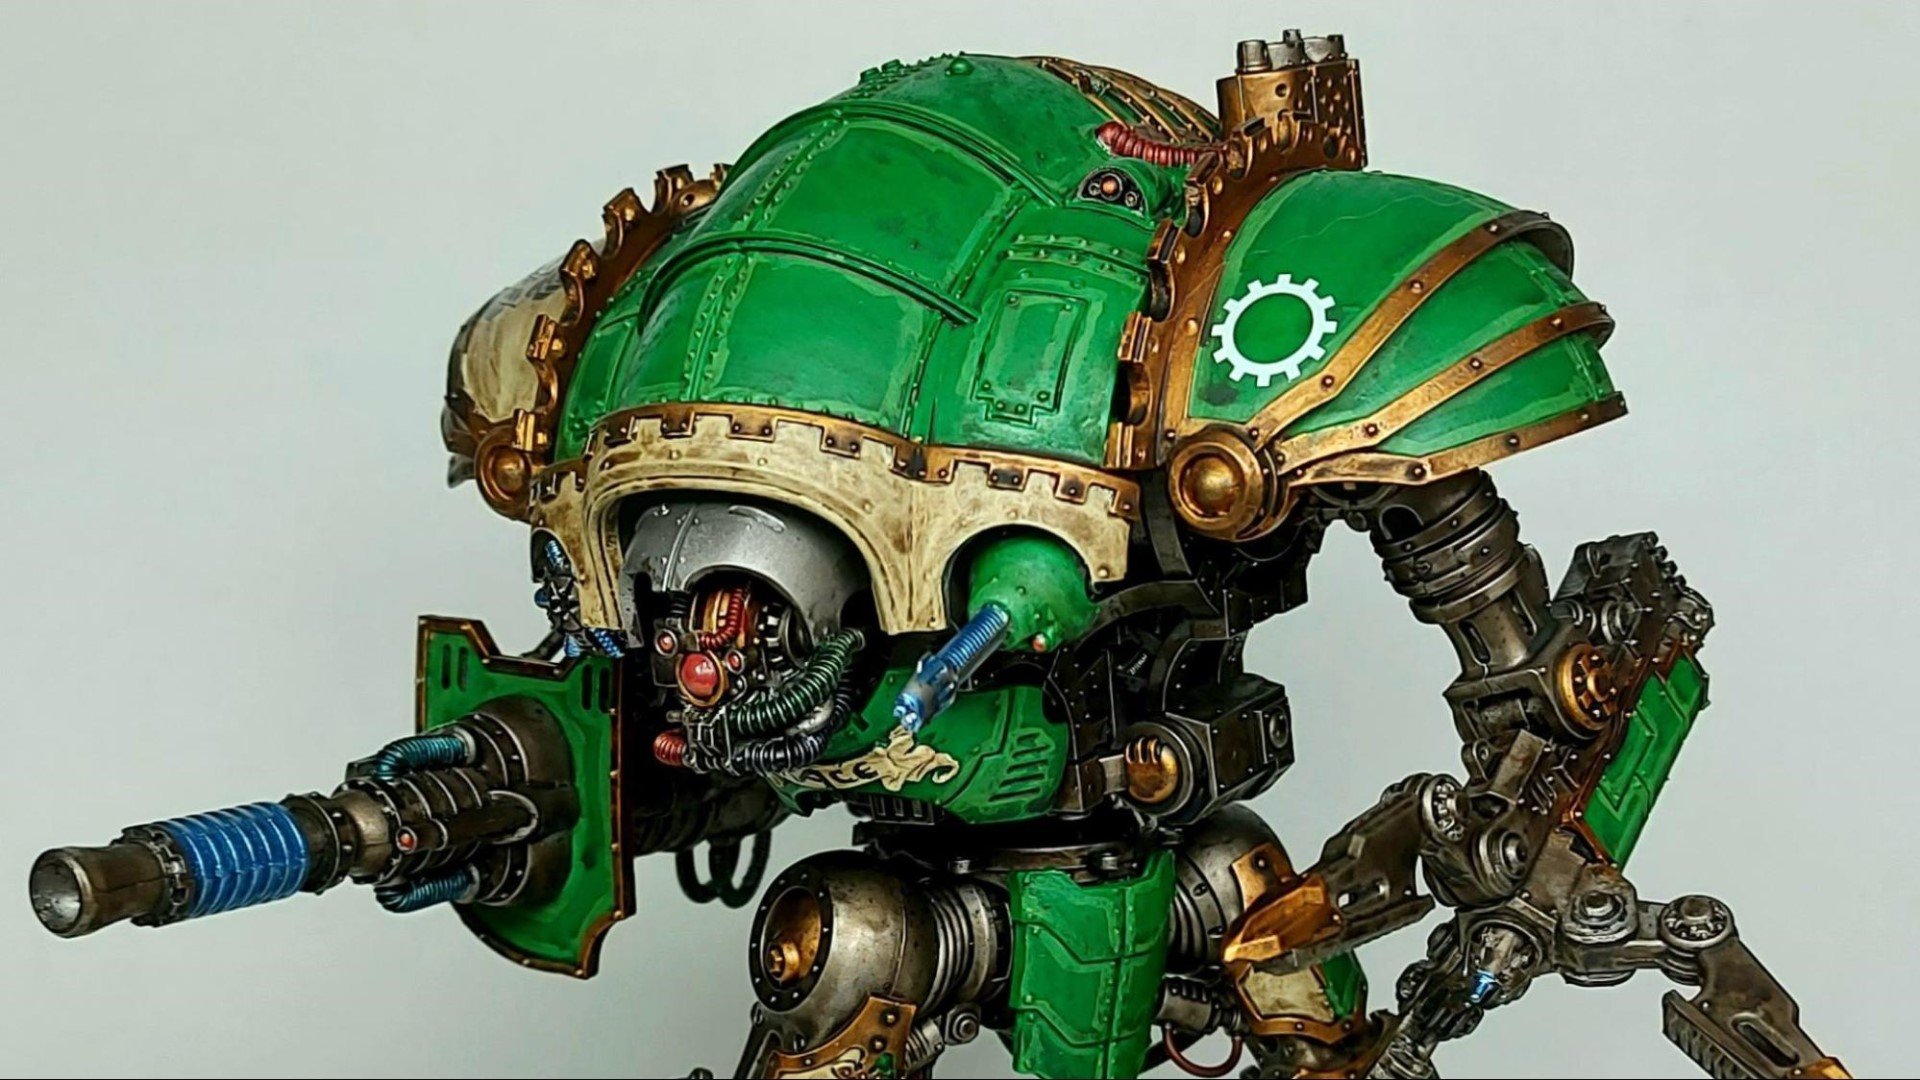 Warhammer 40k Imperial Knights army guide - Photo provided to the author by Stephen Reynolds showing an Imperial Knight Magaera in green and cream paint scheme